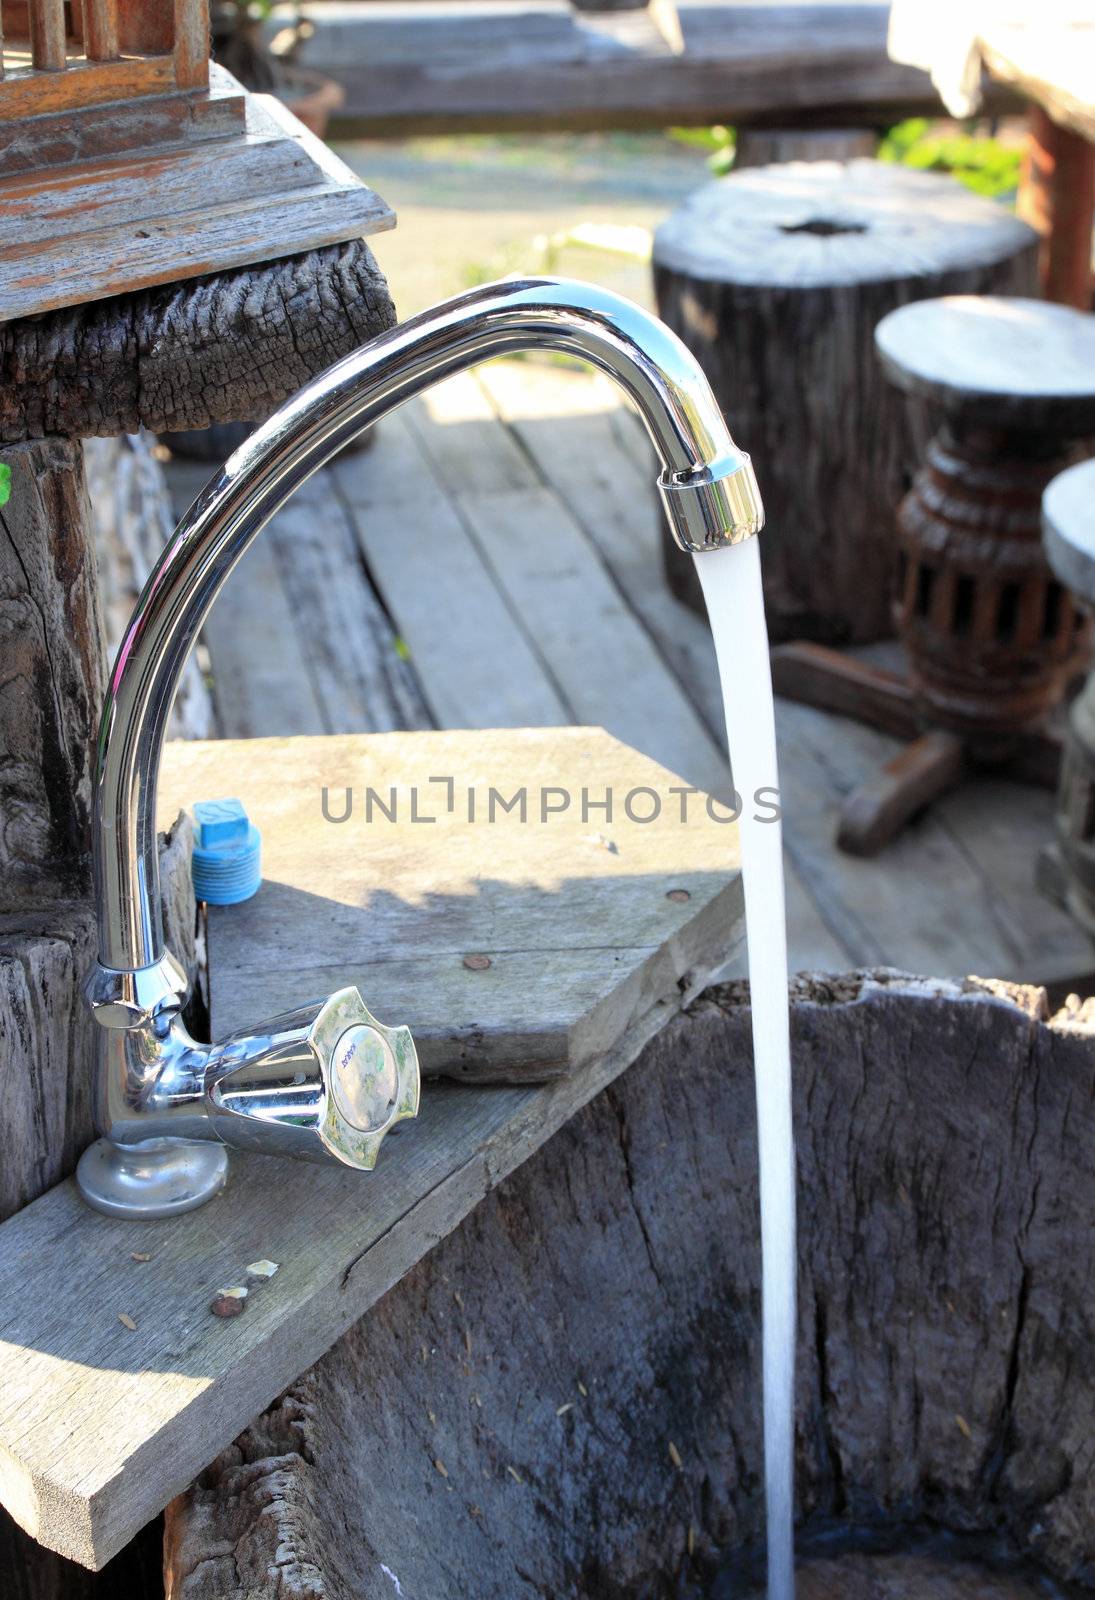 Lifestyle-a faucet with water flowing by geargodz